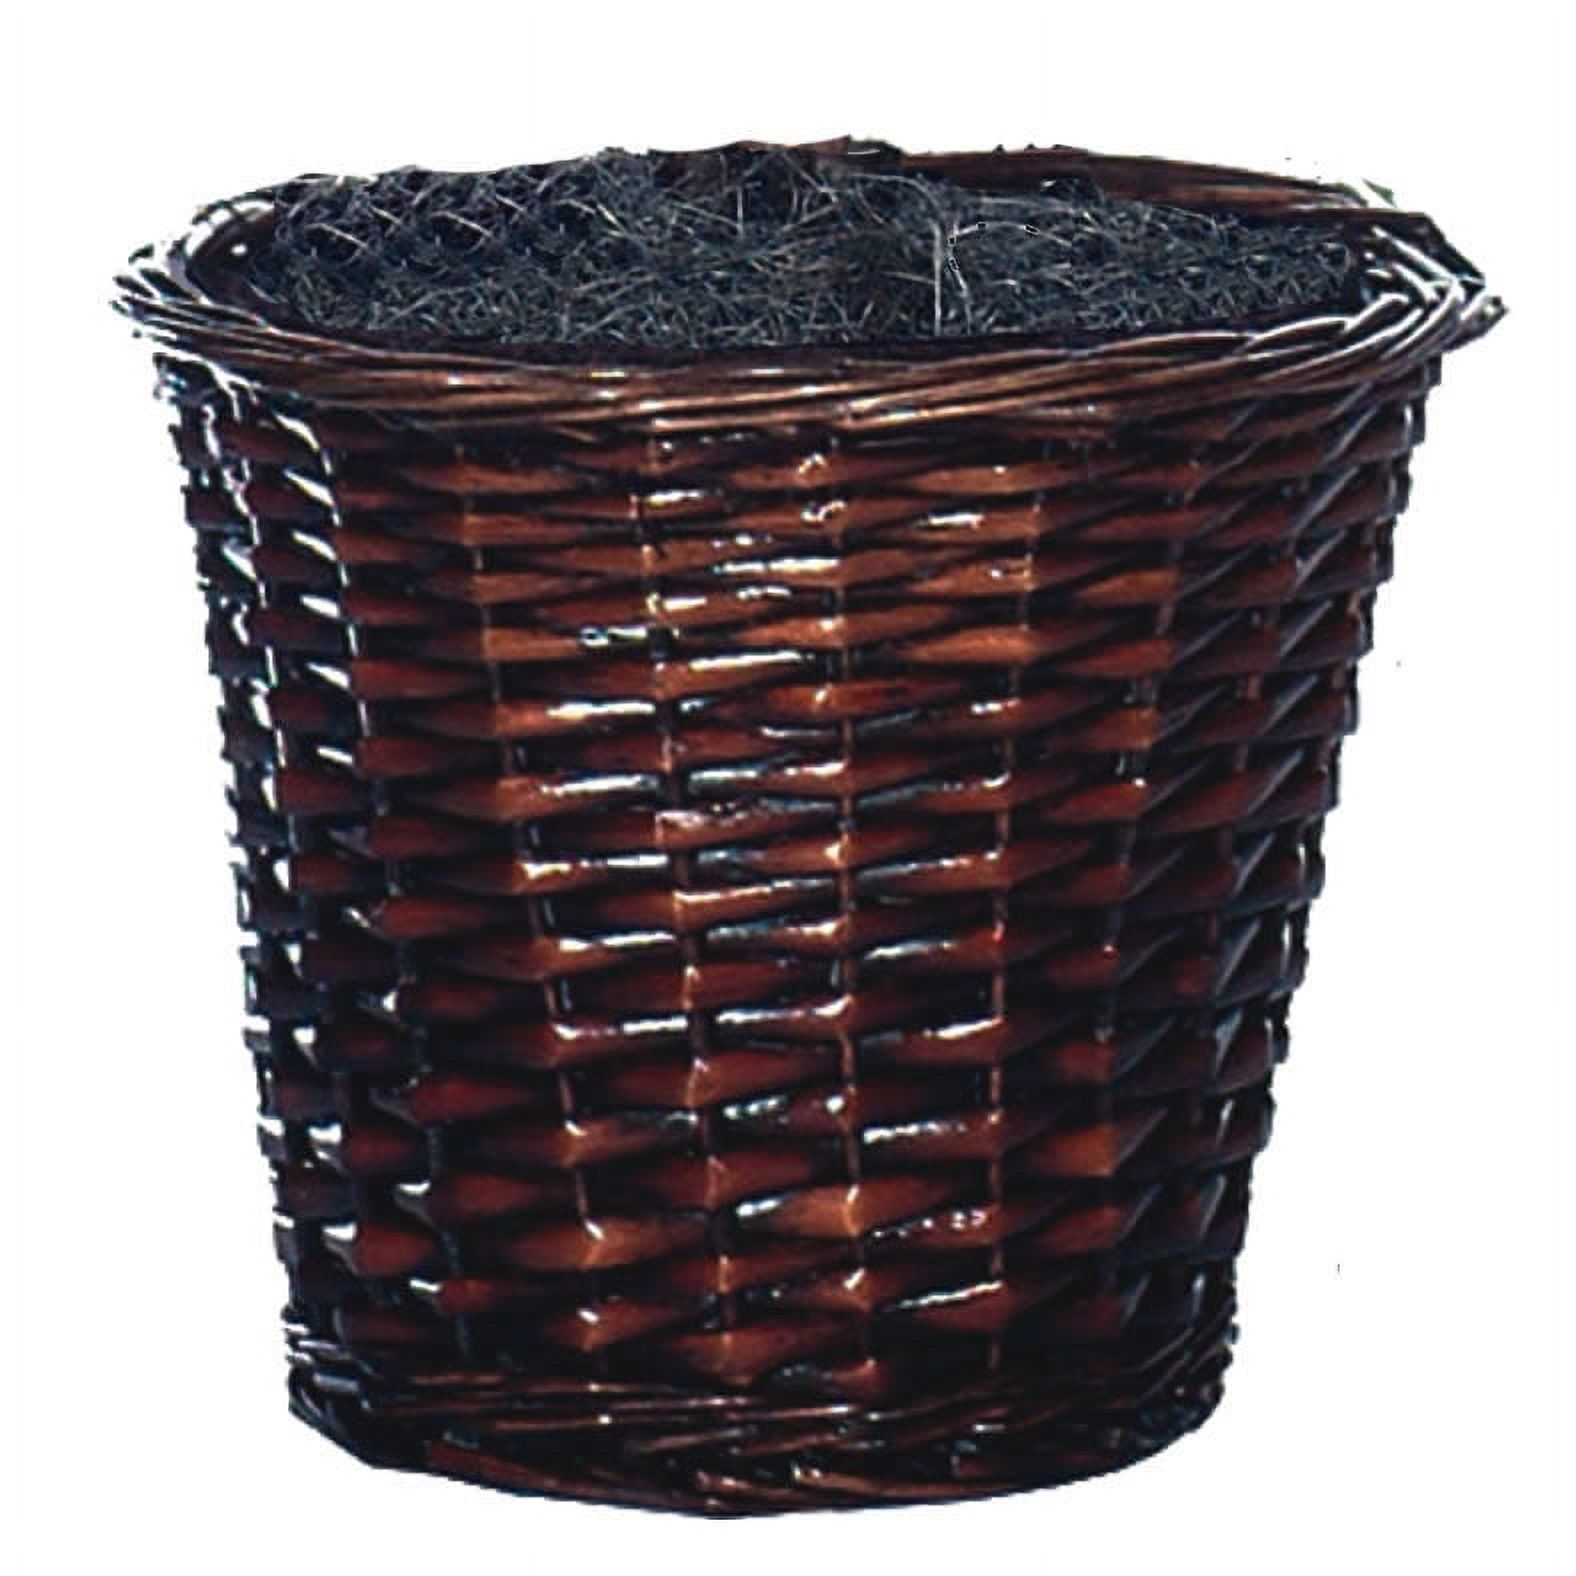 Vickerman 4-Feet Artificial Capensia Bush in Decorative Rattan Basket - Artificial Capensia Bush in Brown Rattan Basket - 4-Foot Tall Faux Ficus Bush - Realistic-Looking Fake Tree for Indoor Decor - image 4 of 6